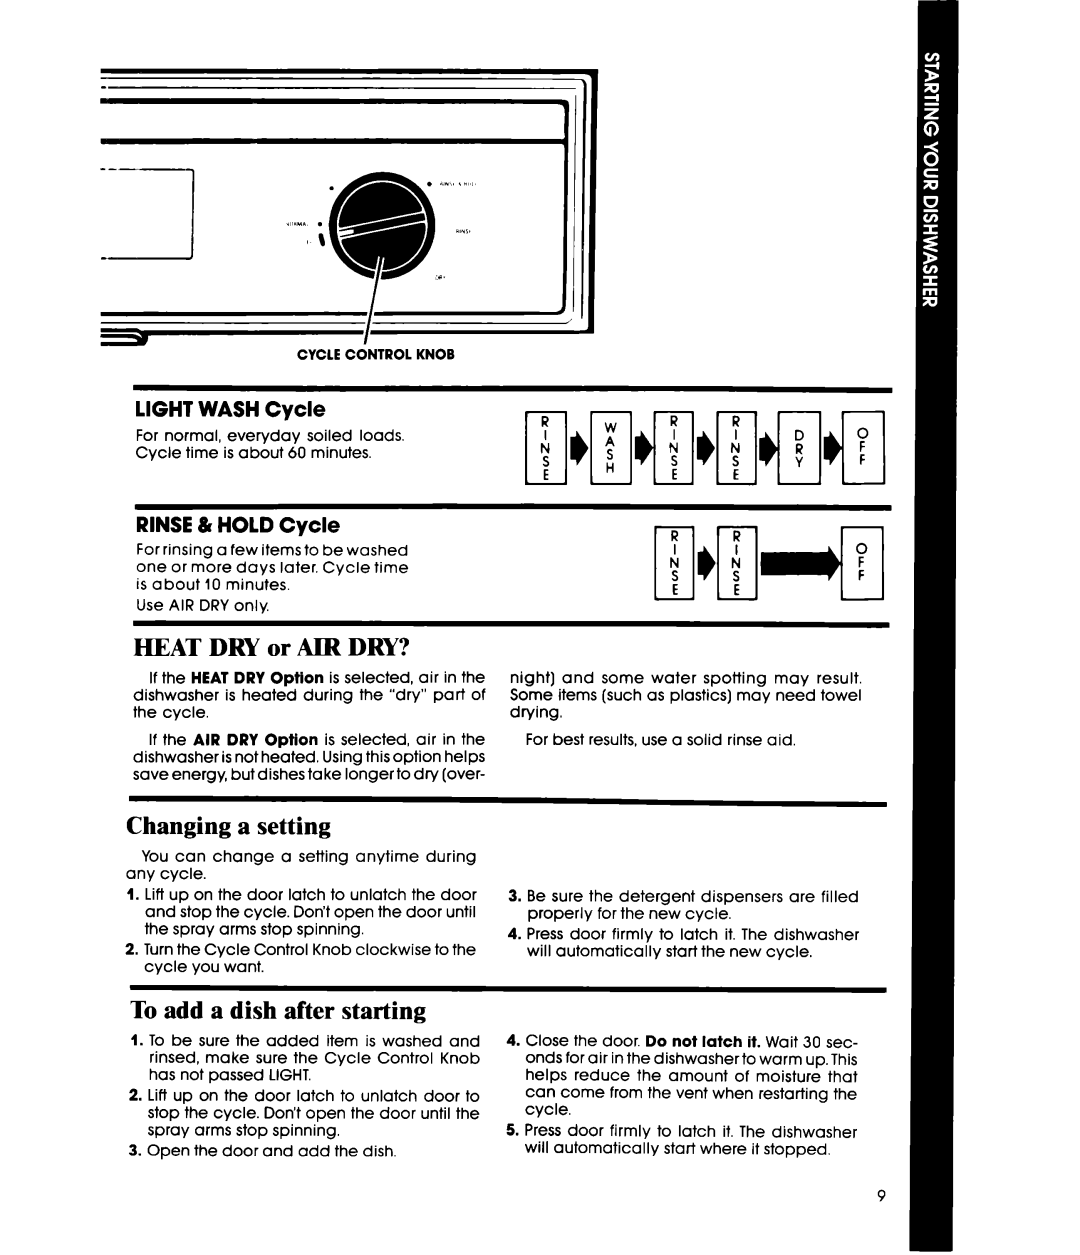 Whirlpool DU1099XT manual HEAT DRY or AIR DRY?, Changing a setting, To add a dish after starting, LIGHT WASH Cycle 